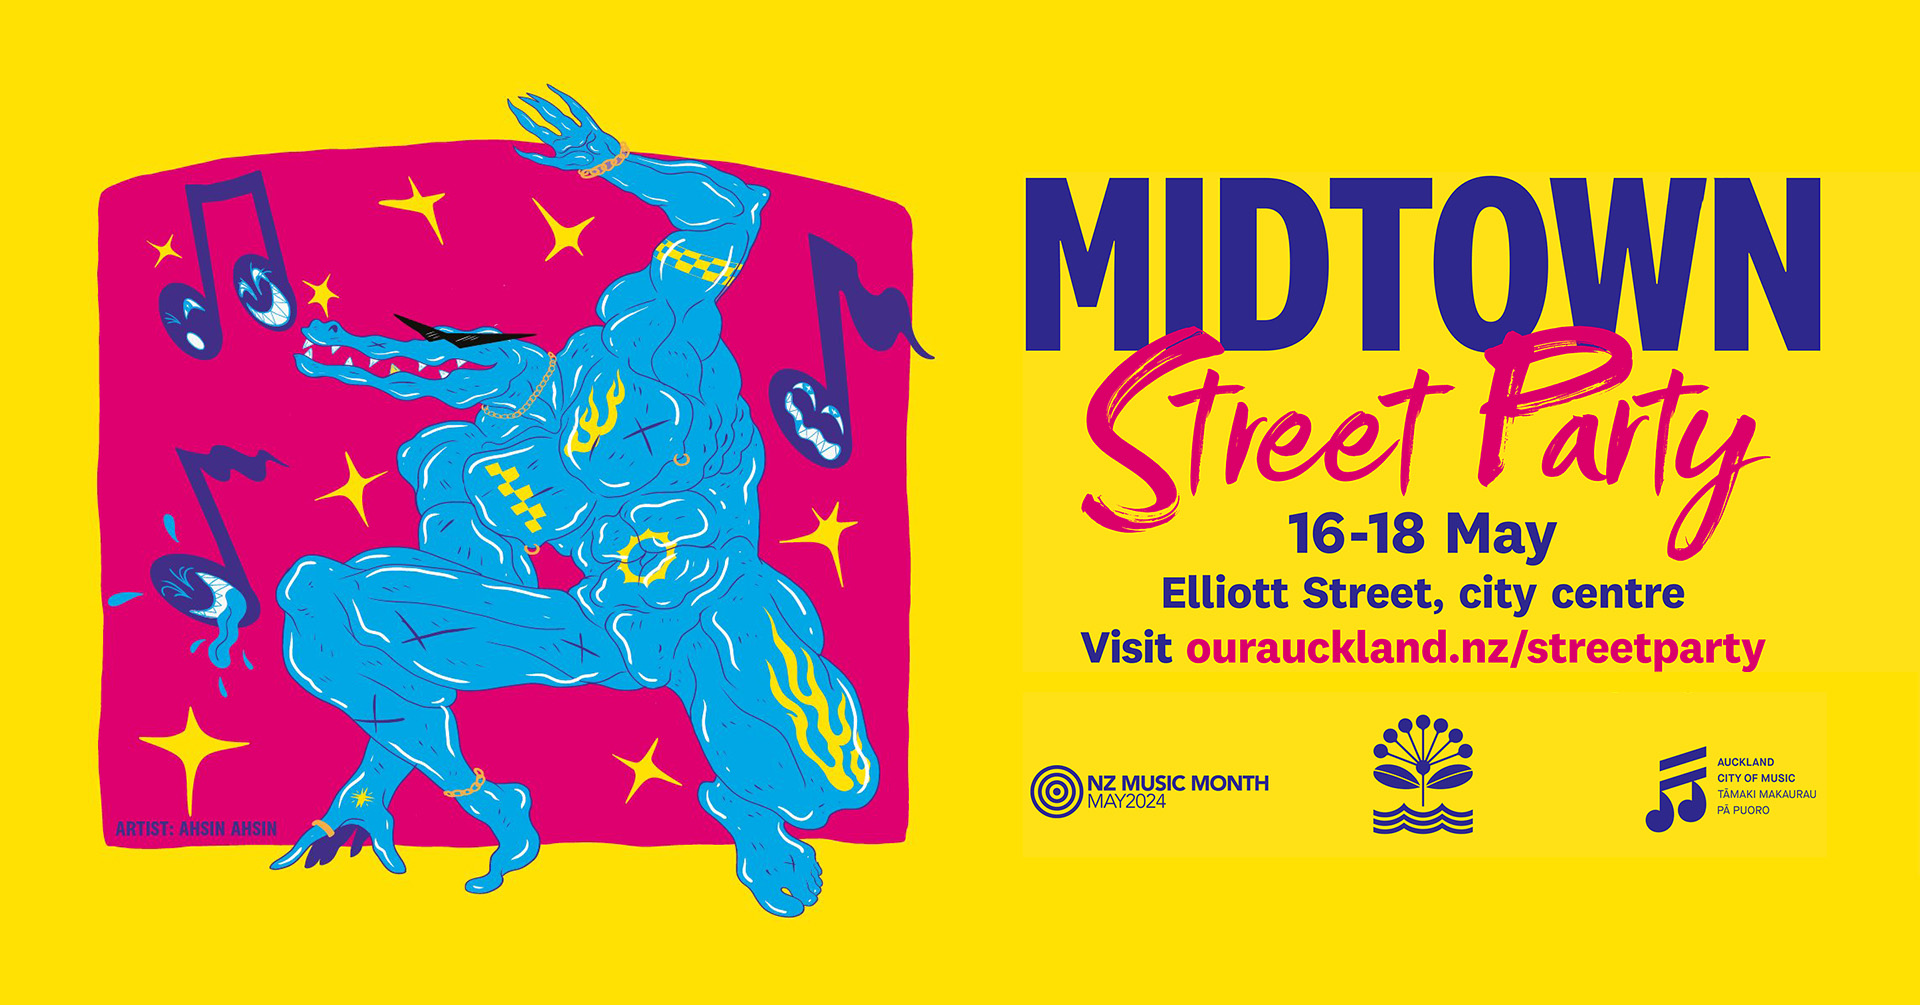 Real Groovy Presents: Midtown Street Party